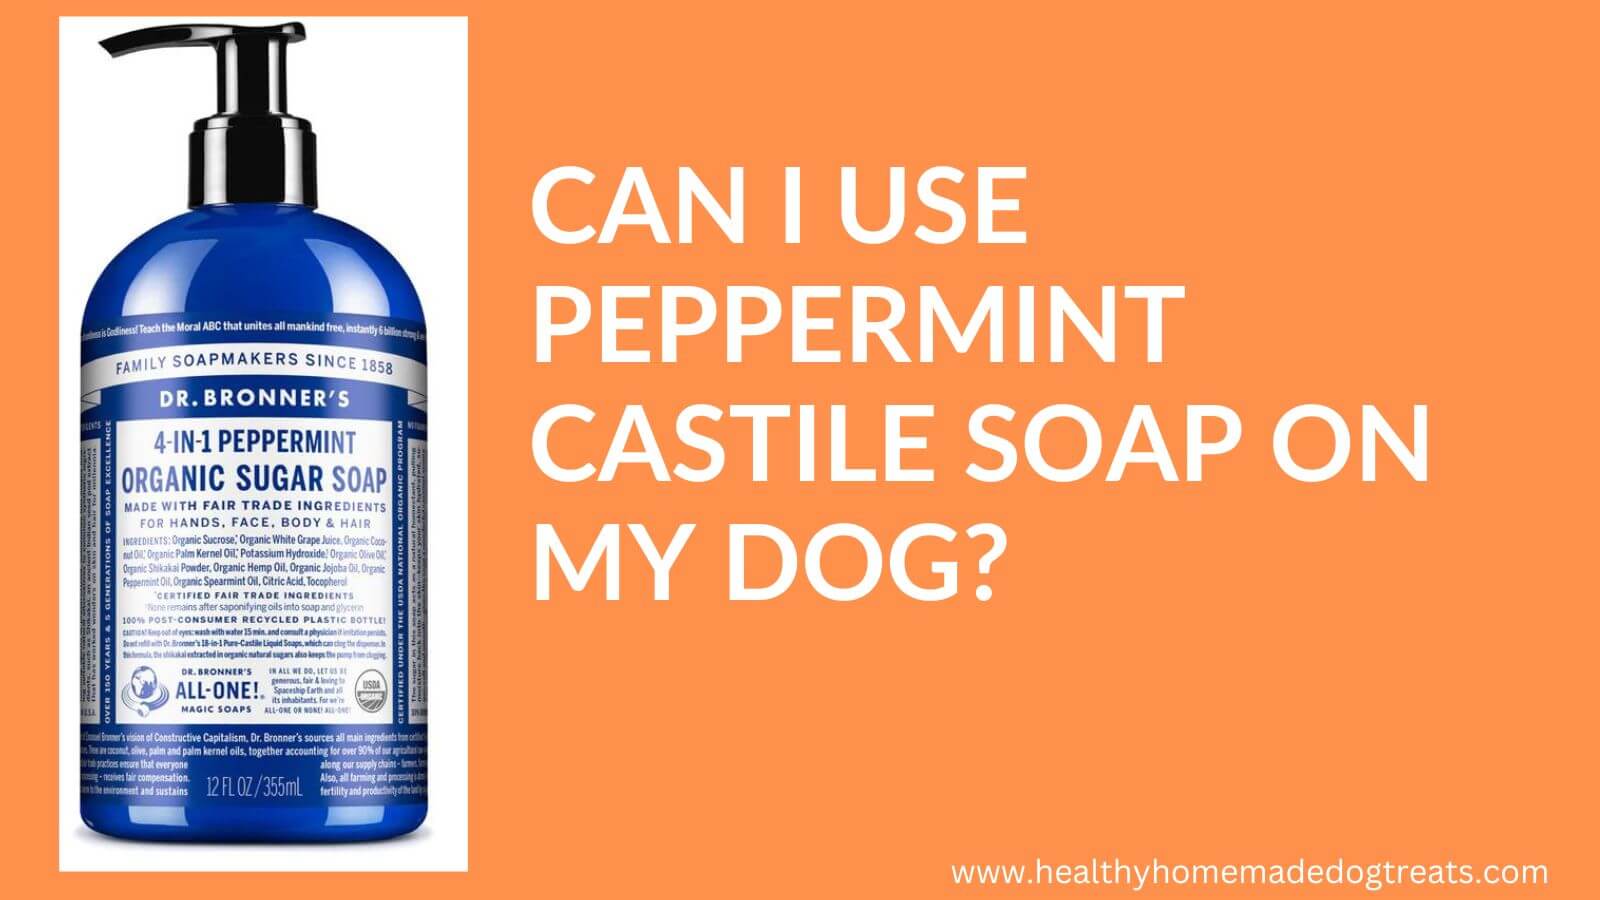 Can I Use Peppermint Castile Soap On My Dog?